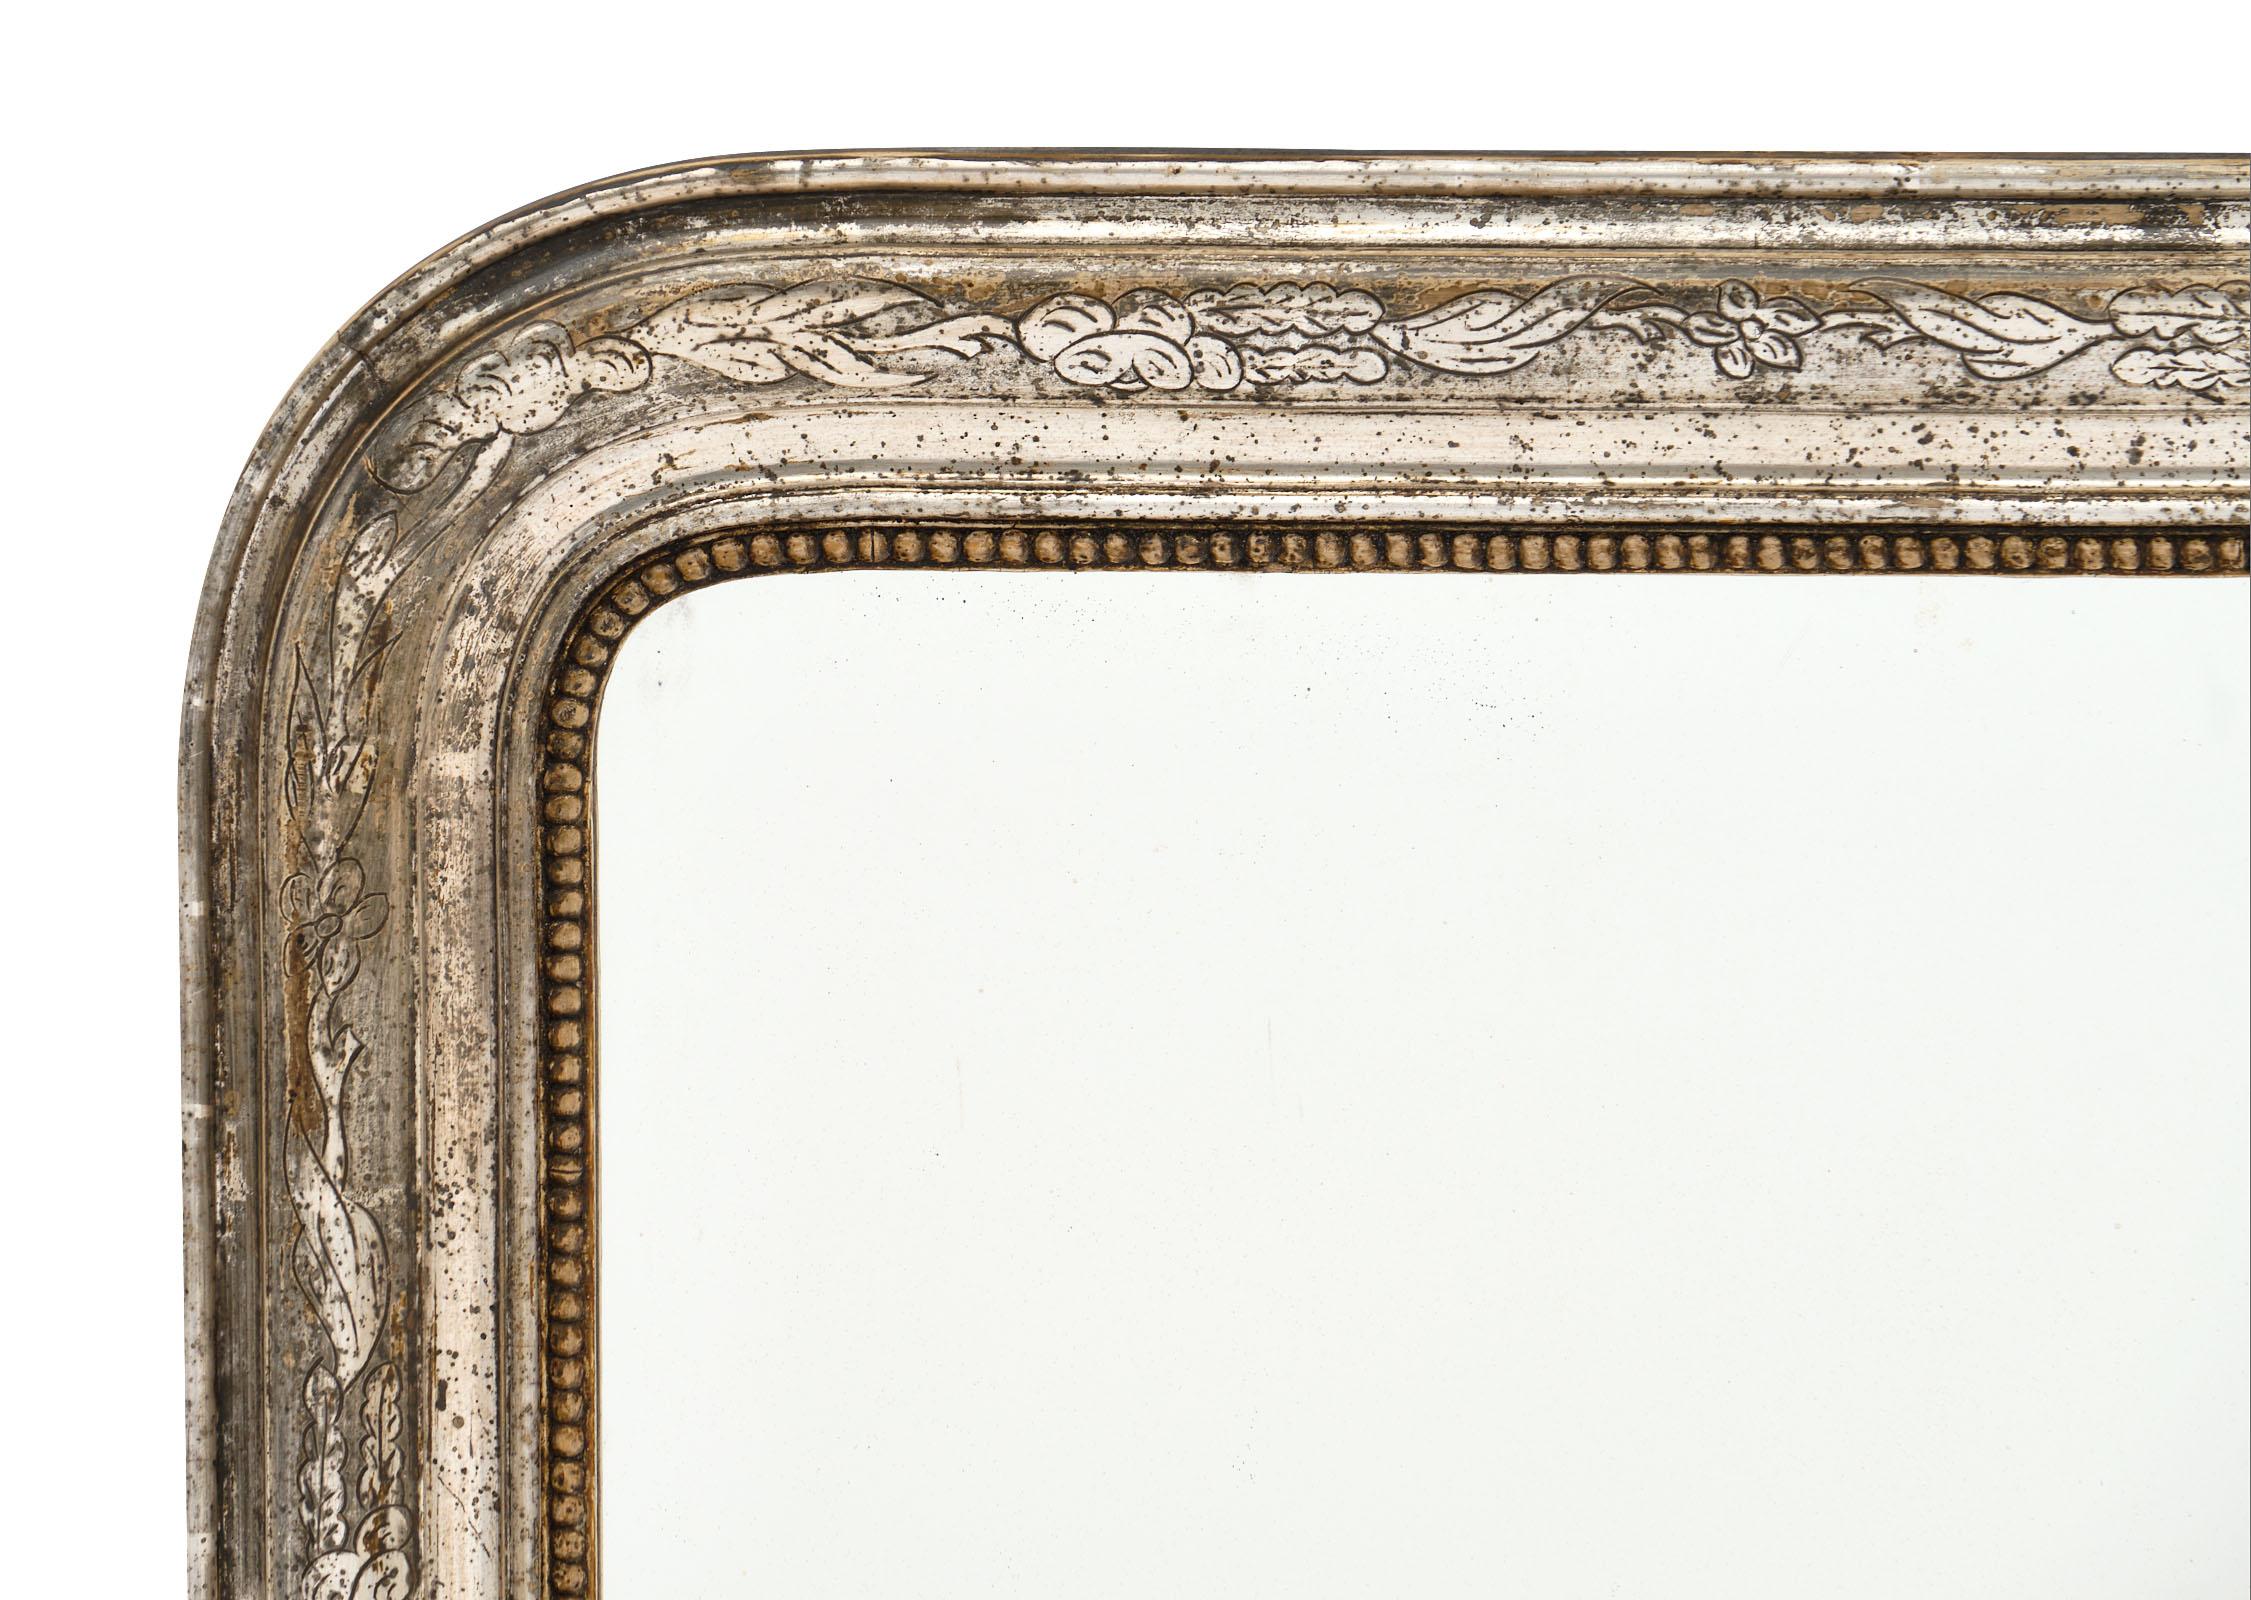 French silver leaf Louis Philippe period mirror with a beautiful engraved frame with floral motifs. We love the original patina and classic rounded corners.